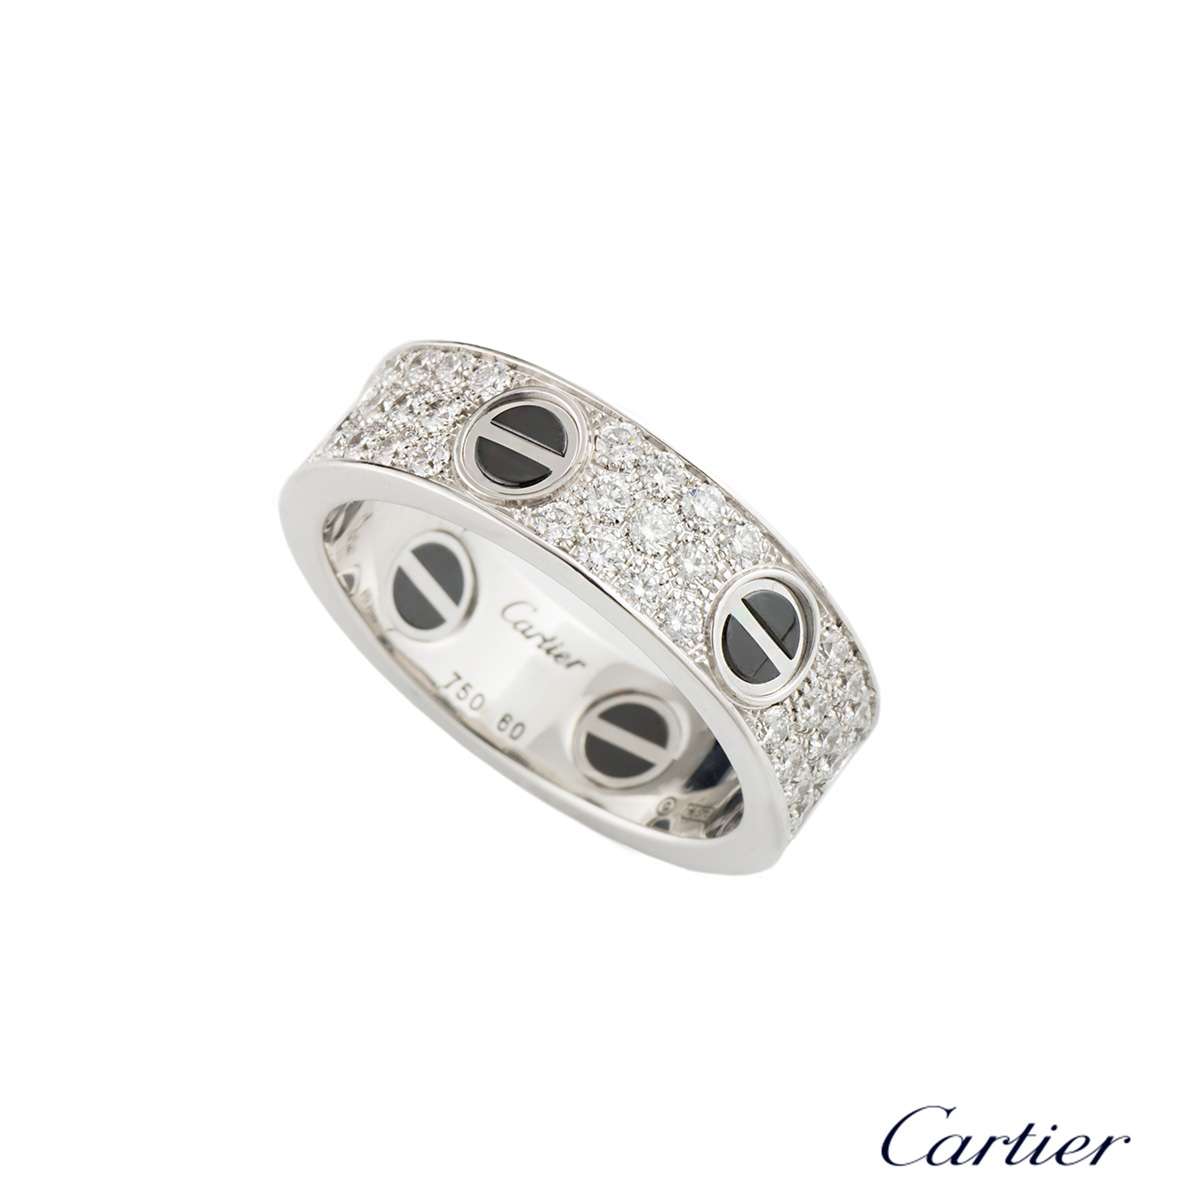 cartier 750 60 ring